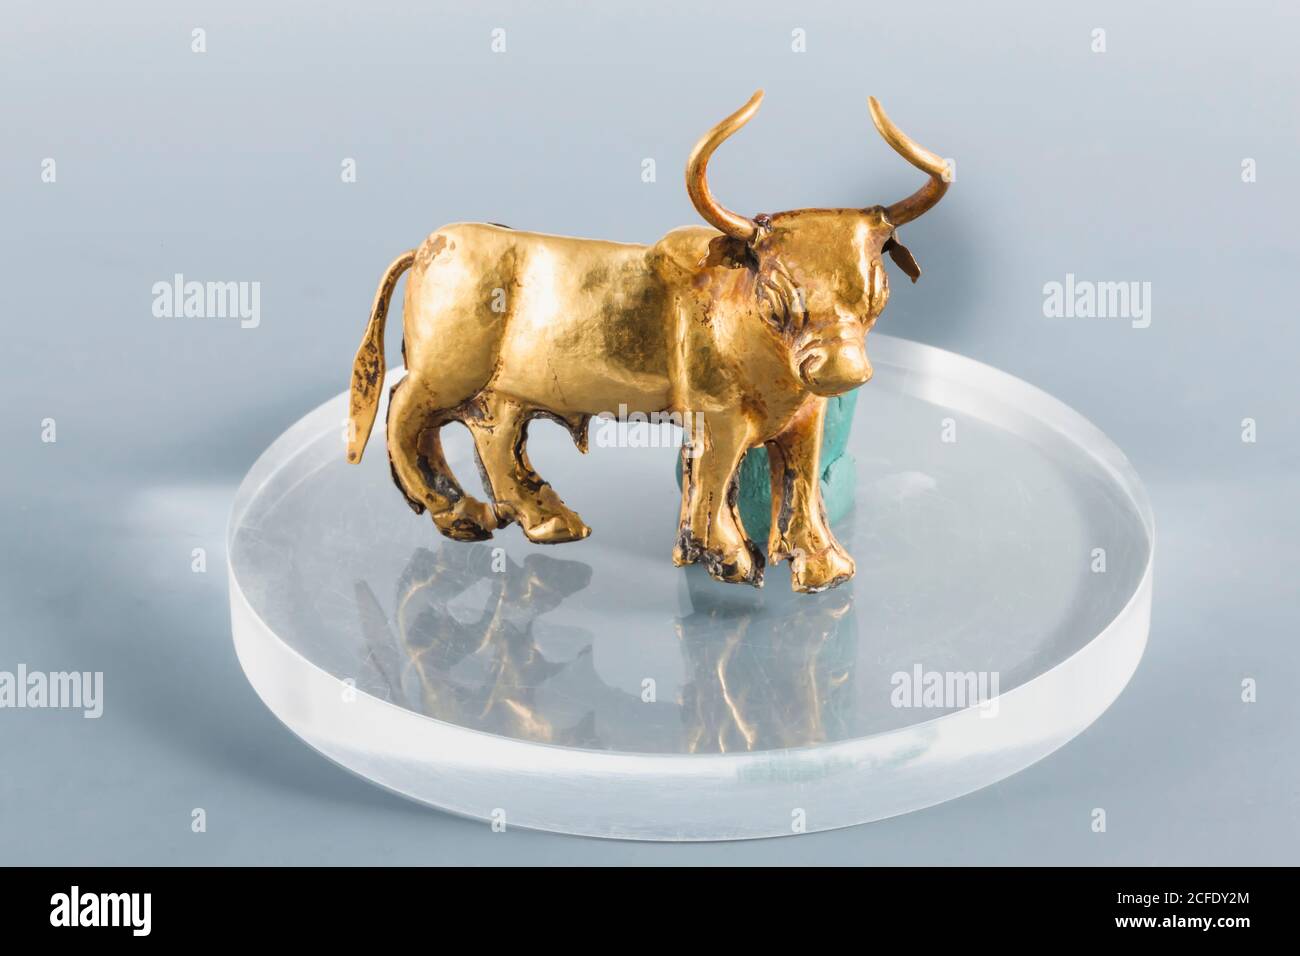 Gold Bull statue, from Quetta, Indus valley civilization (valuables vault), National Museum of Pakistan, Karachi, Sindh, Pakistan, South Asia, Asia Stock Photo